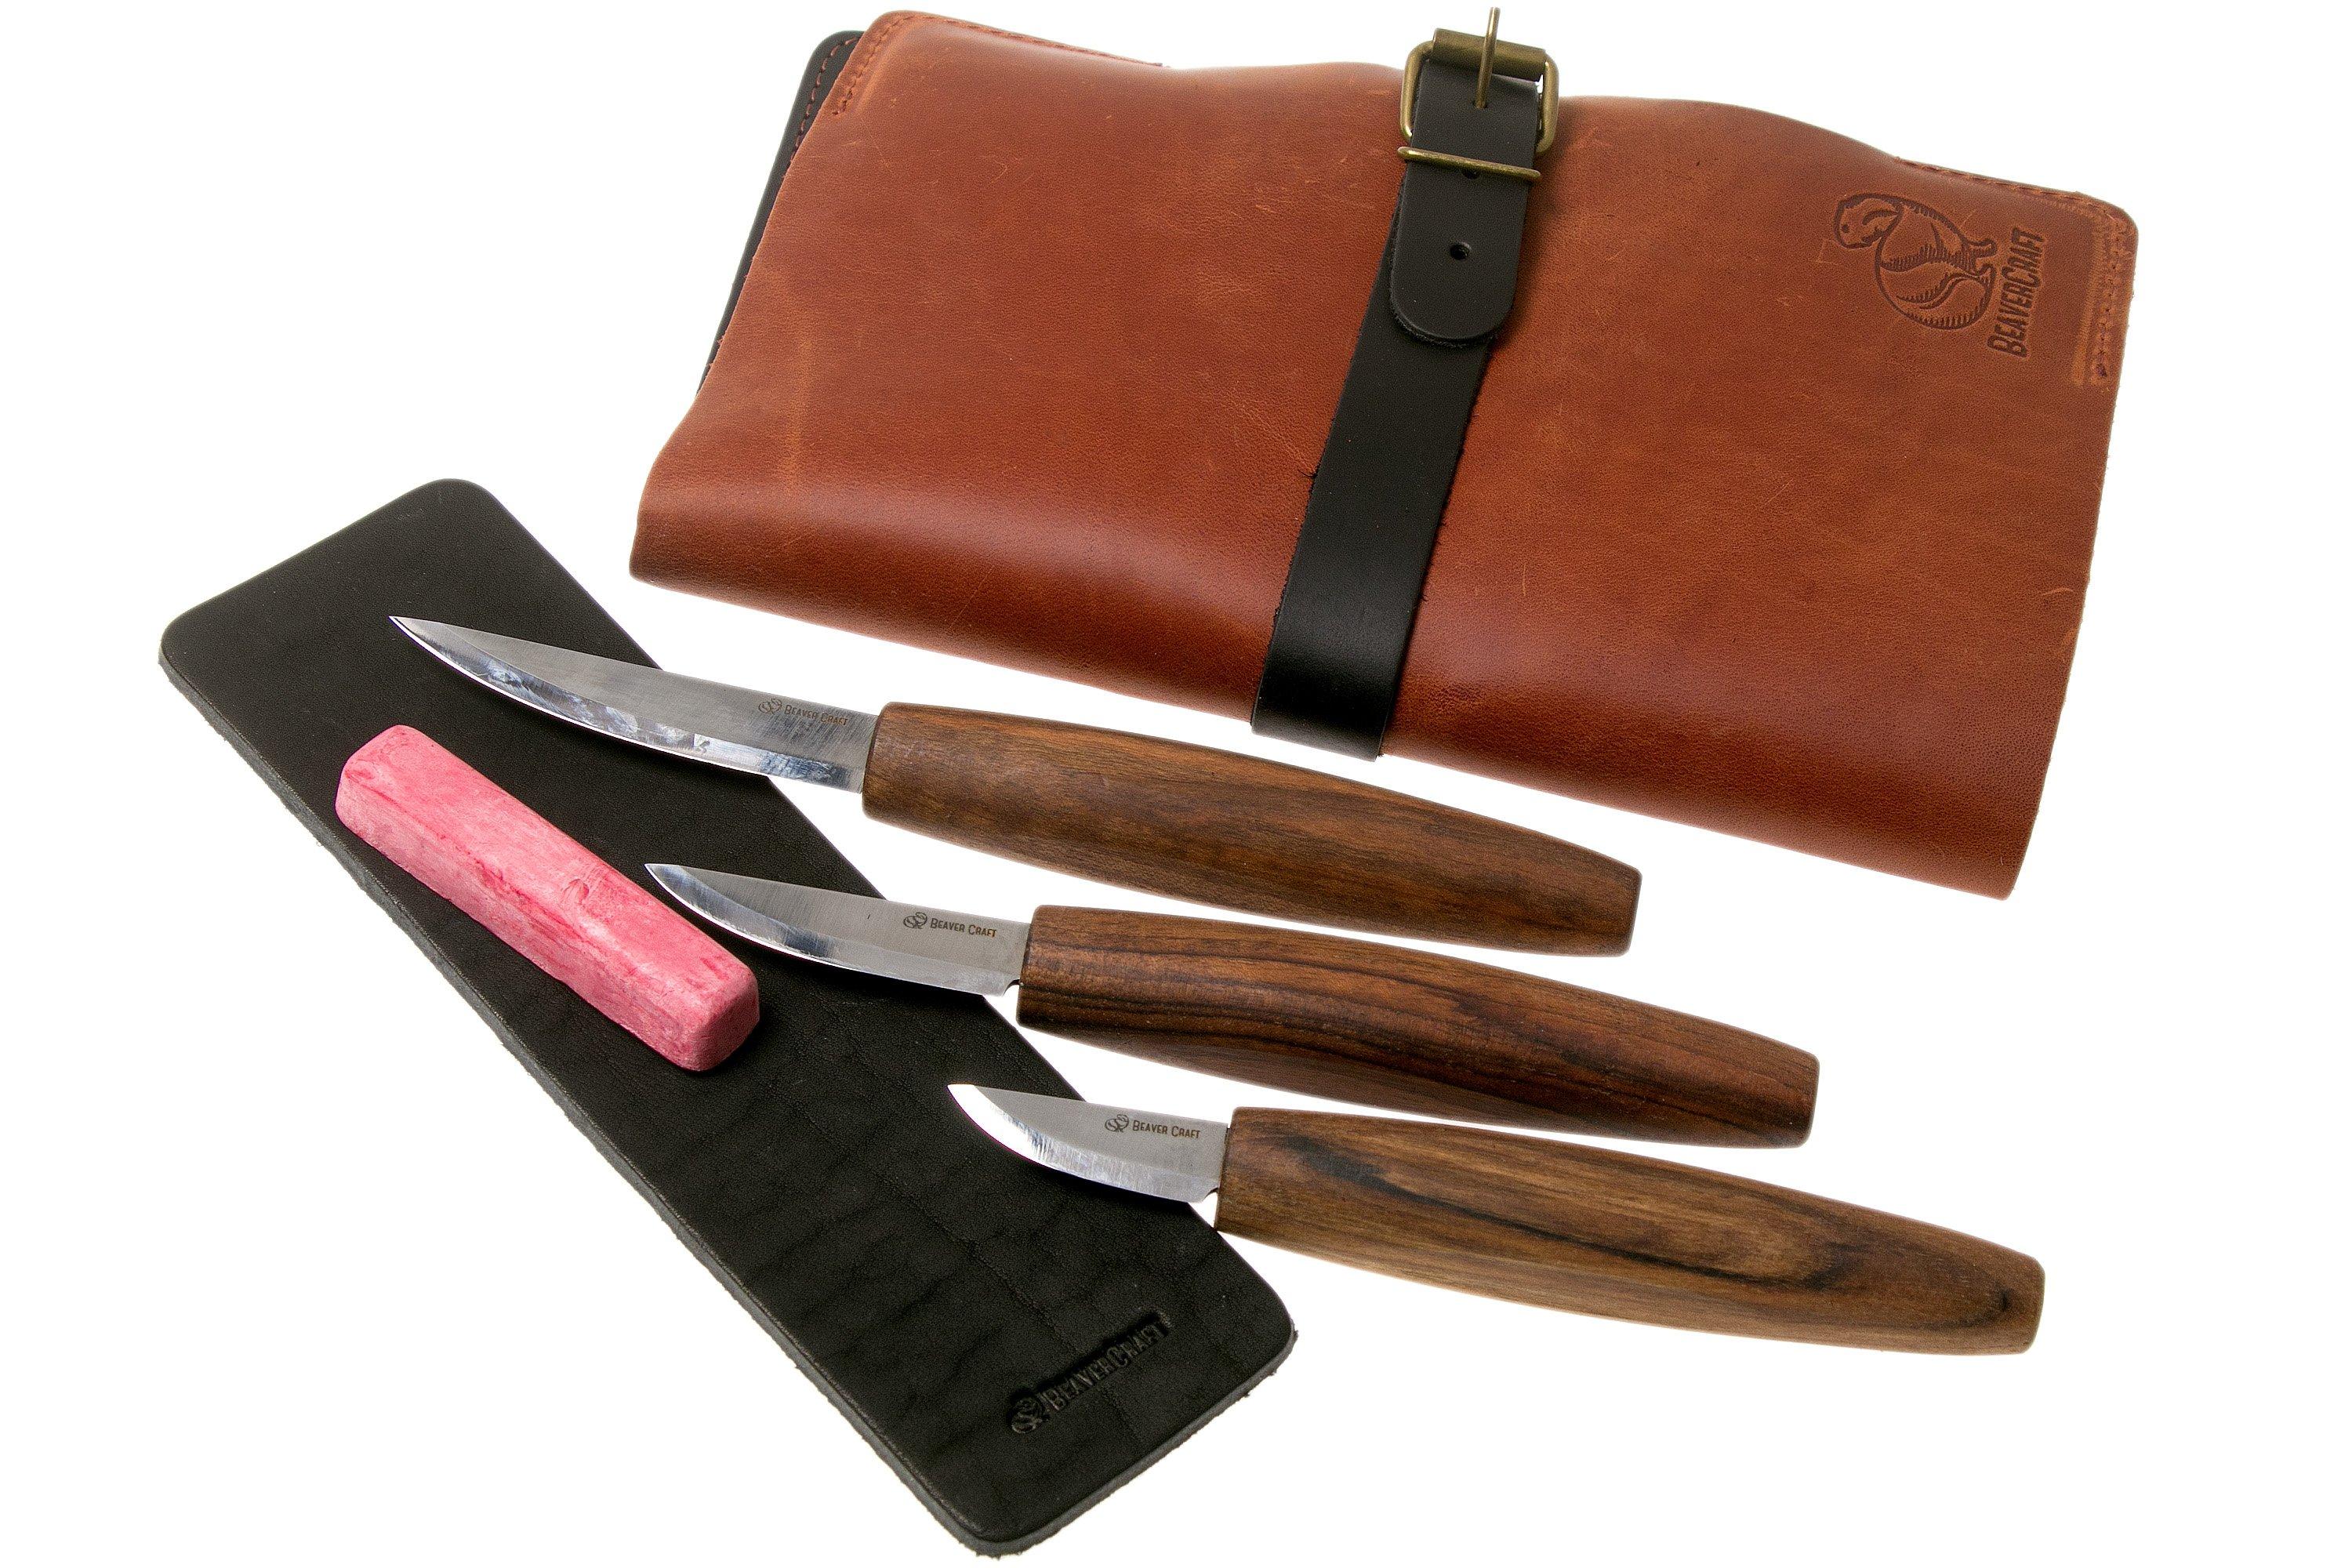 Beaver Craft Deluxe Carving Set